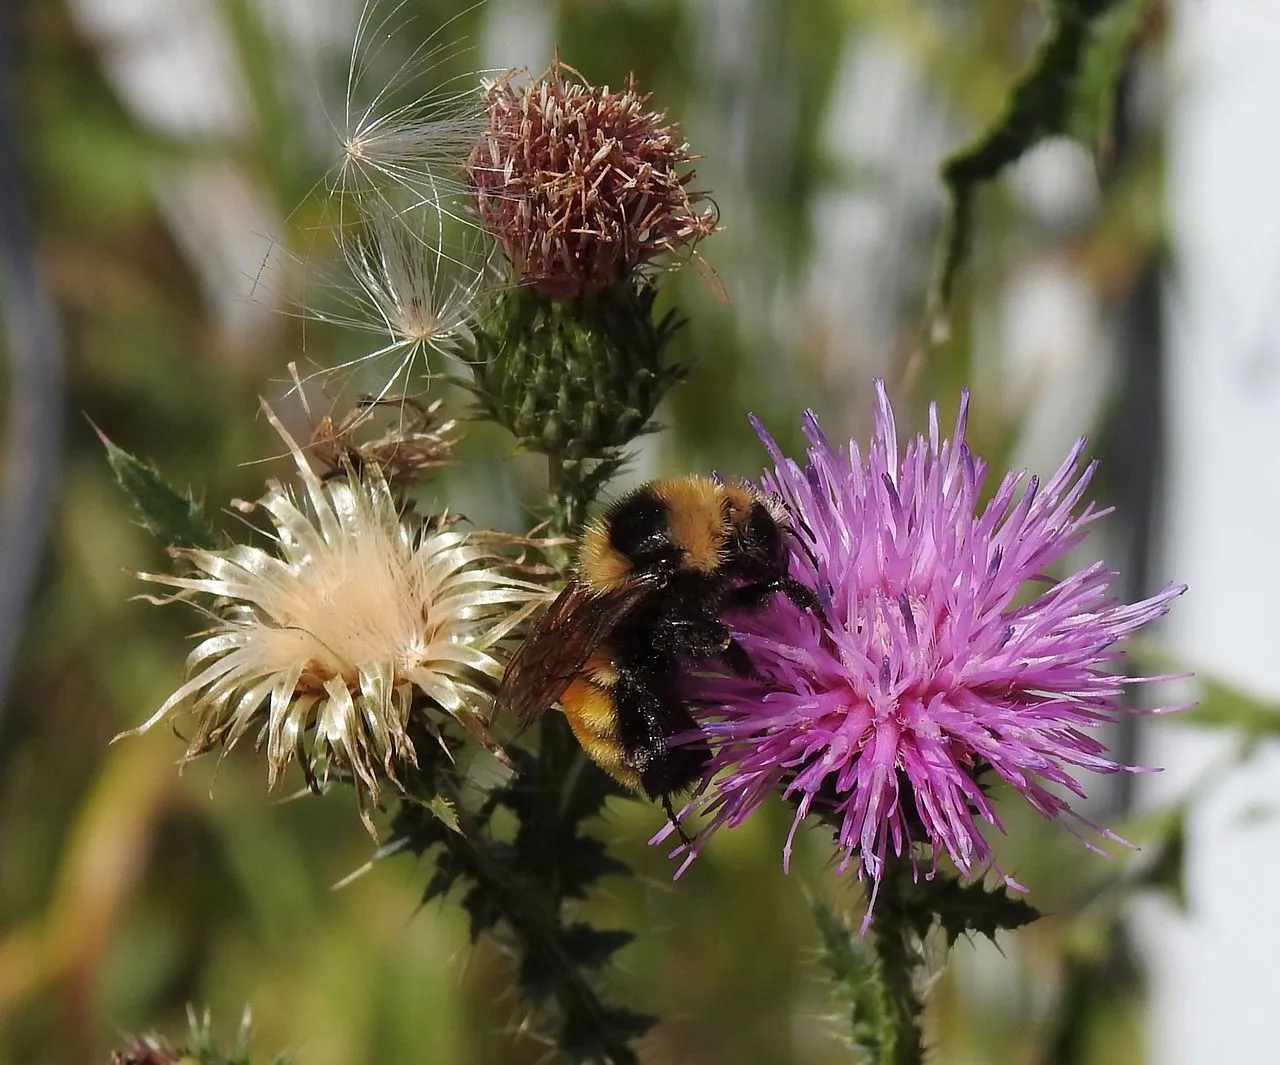 Canada thistle seeds are pale brown in color usually and occasionally white or cream.